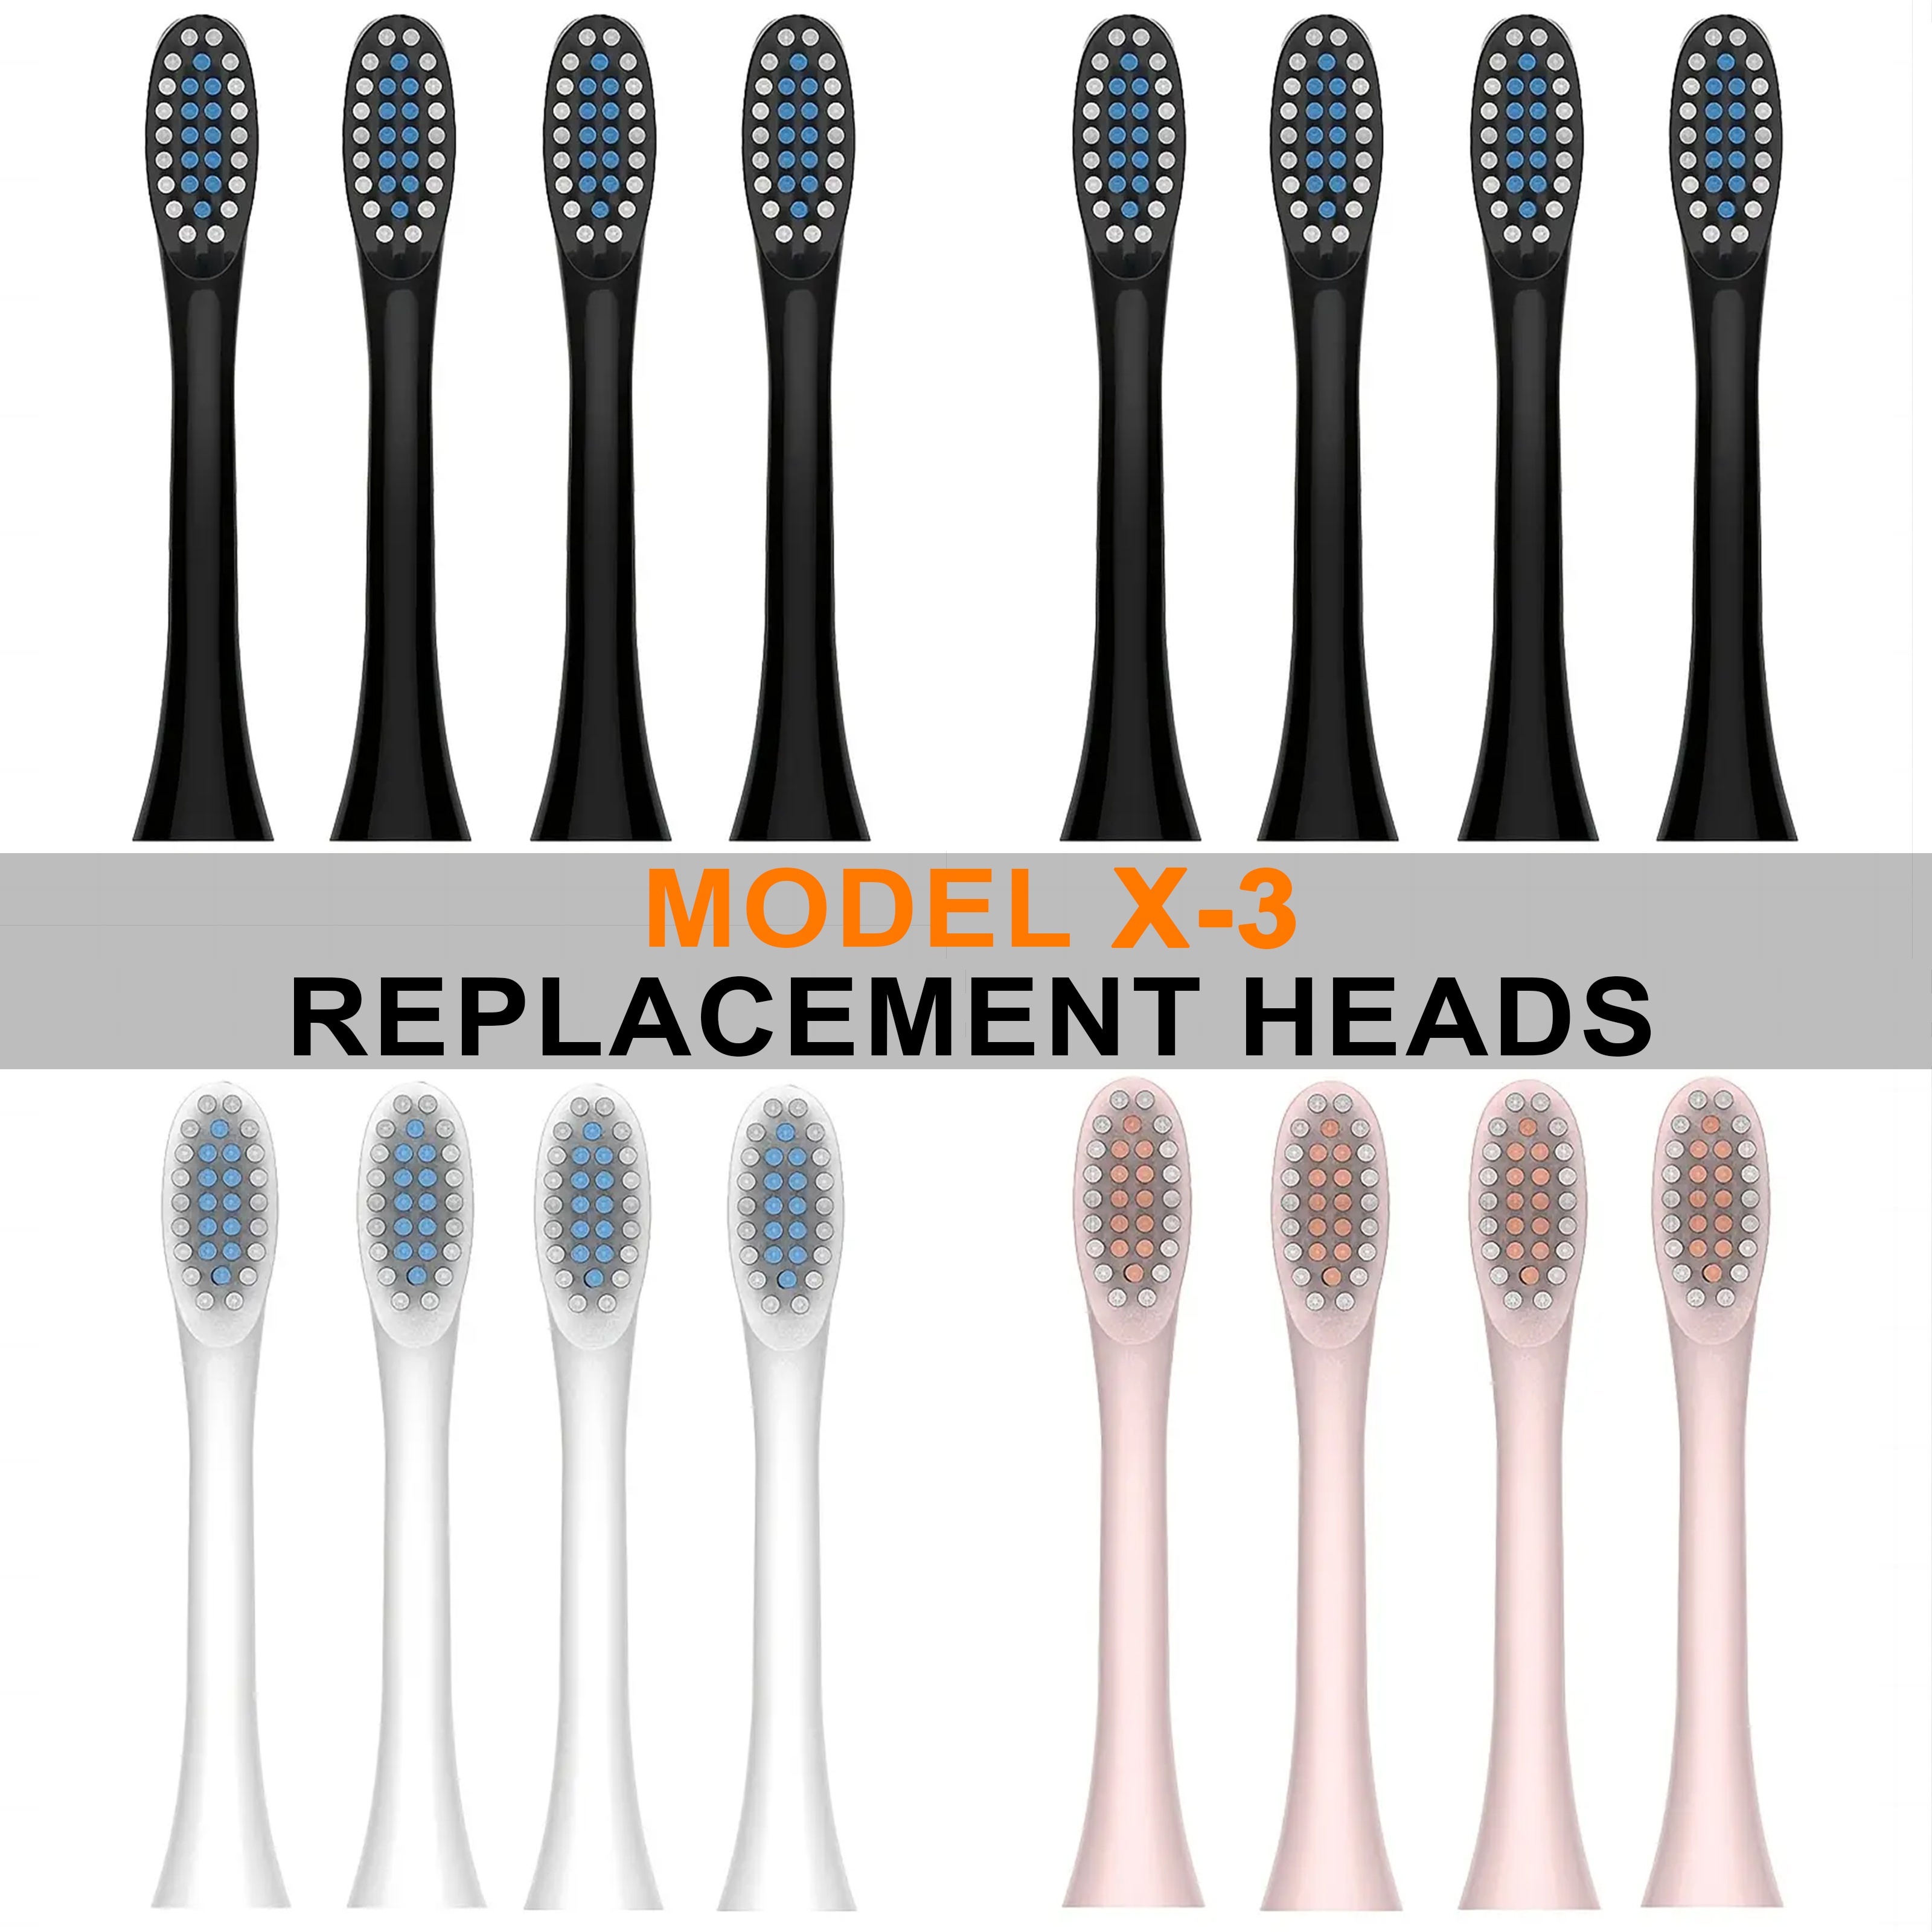 

Electric Toothbrush Replacement Heads Replacement Heads - Only Compatible With Model X-3